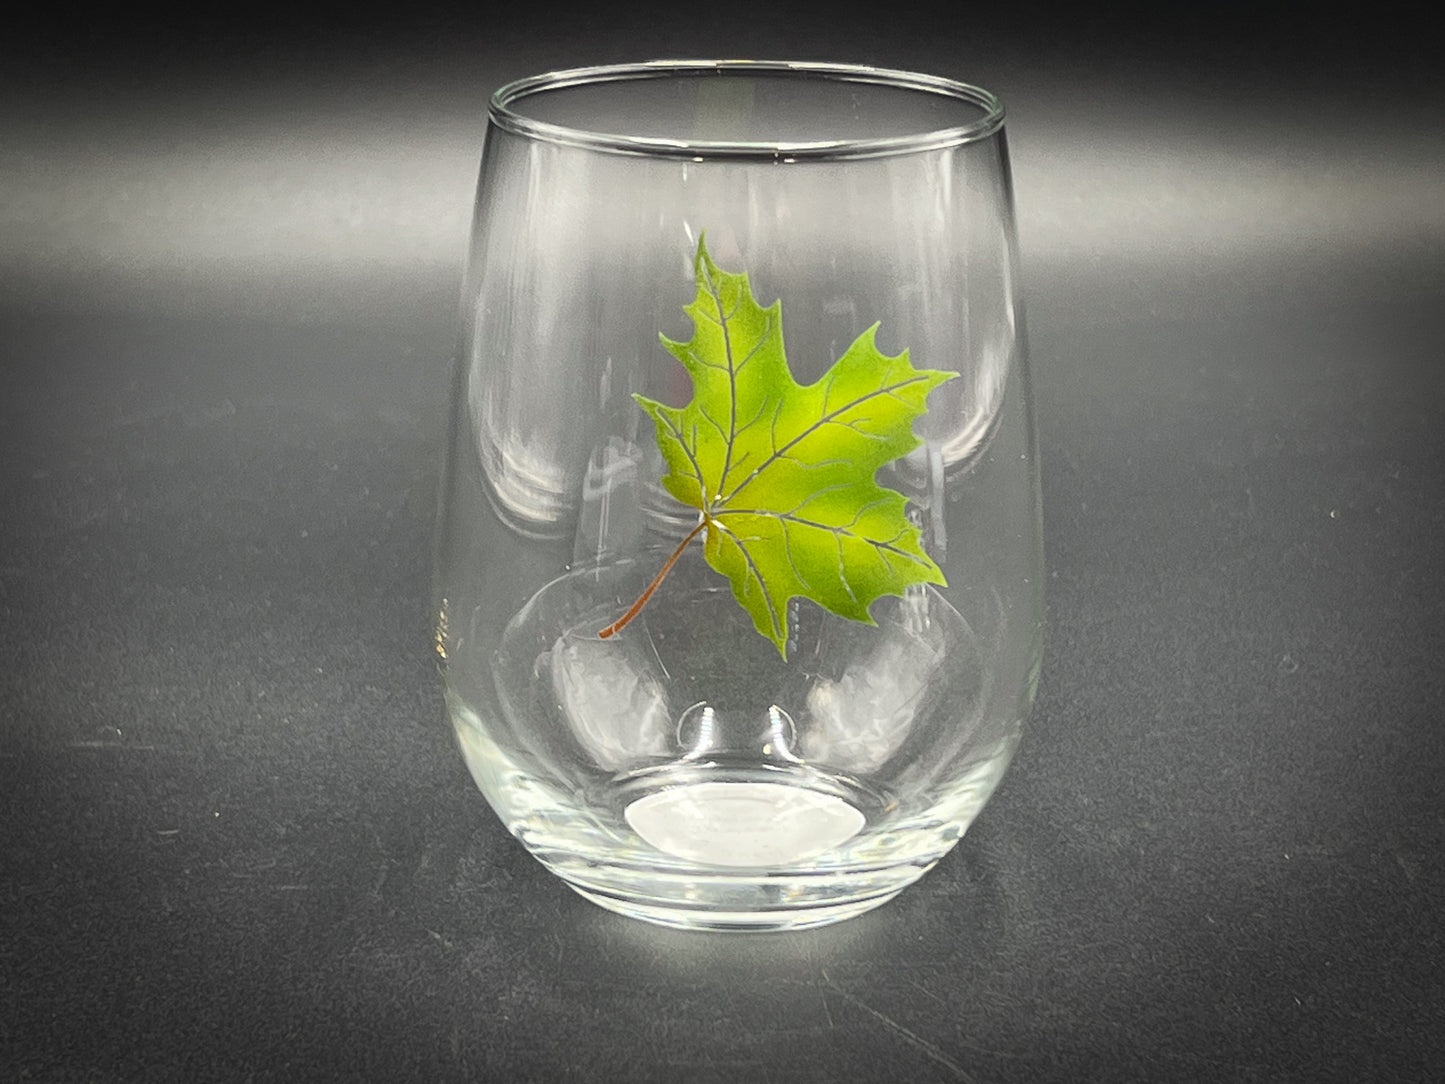 Summer Maple Leaf Engraved and Painted - 17 oz Stemless Wine Glass